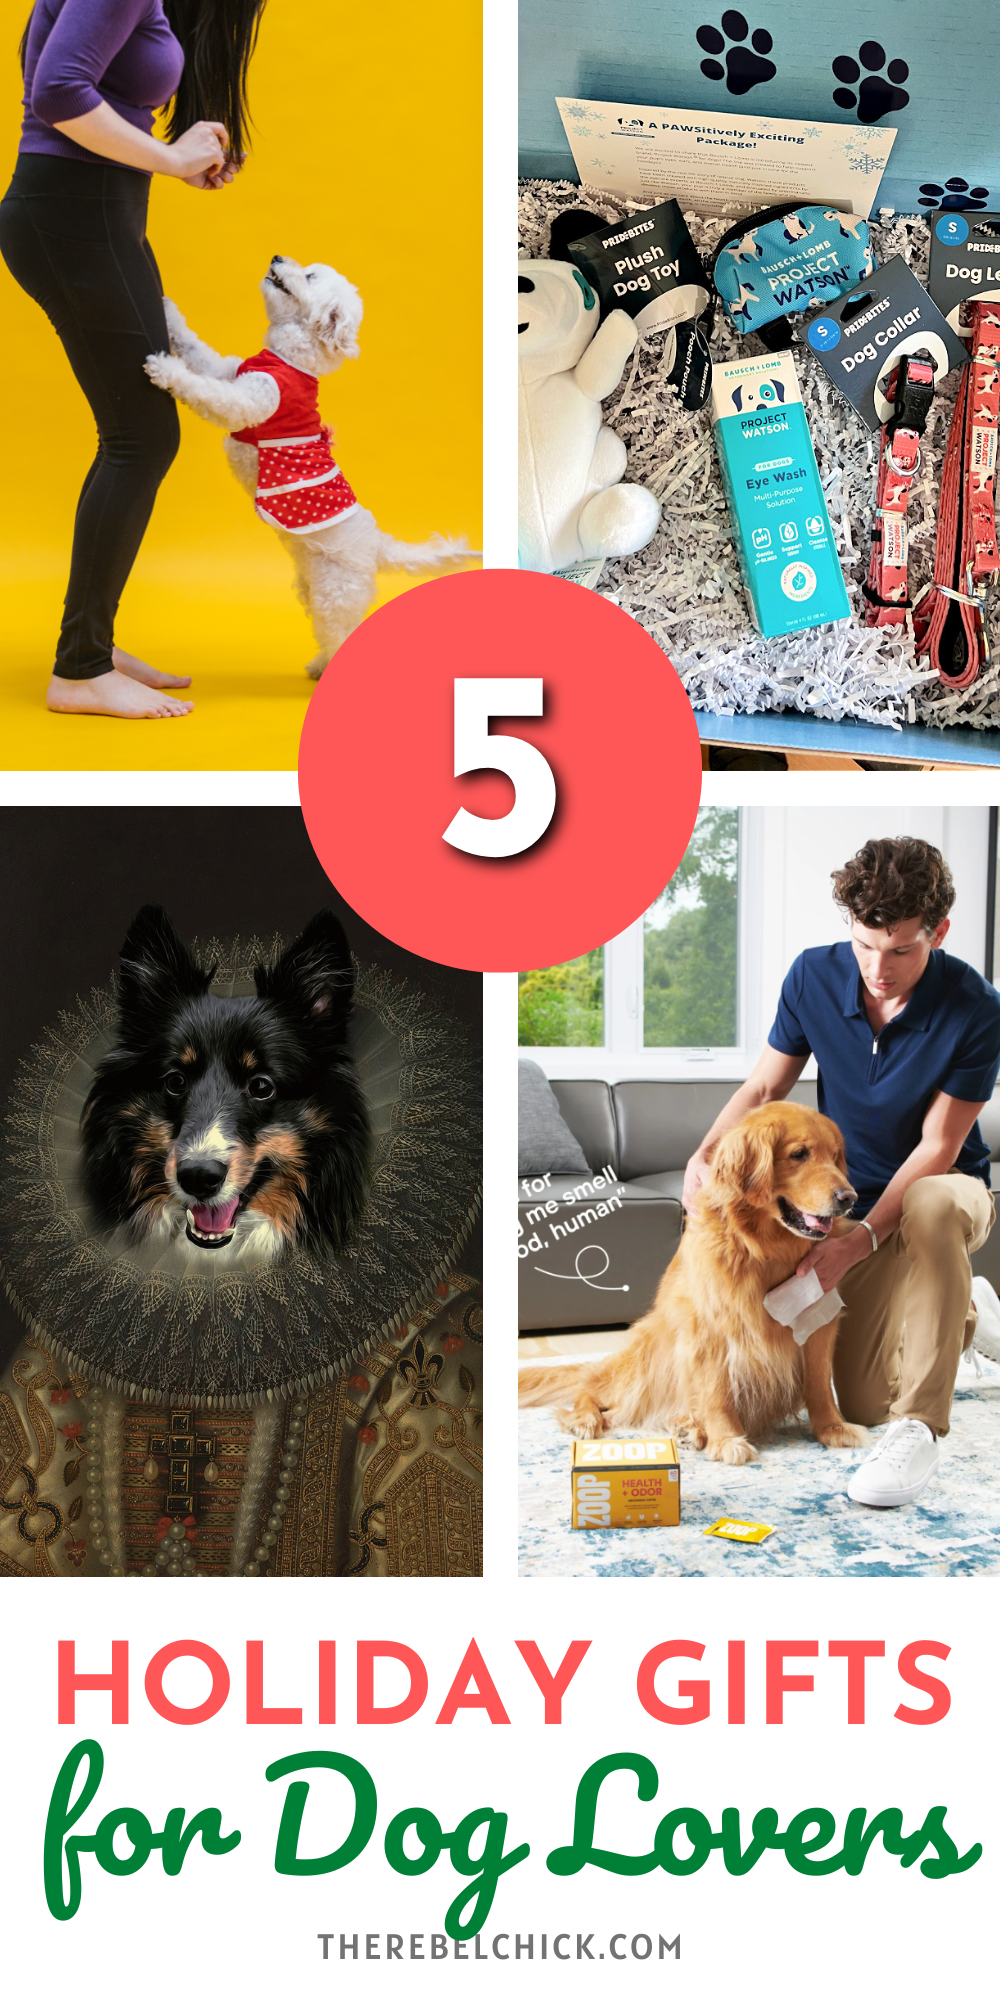 Top 5 Holiday Gifts for Dog Lovers